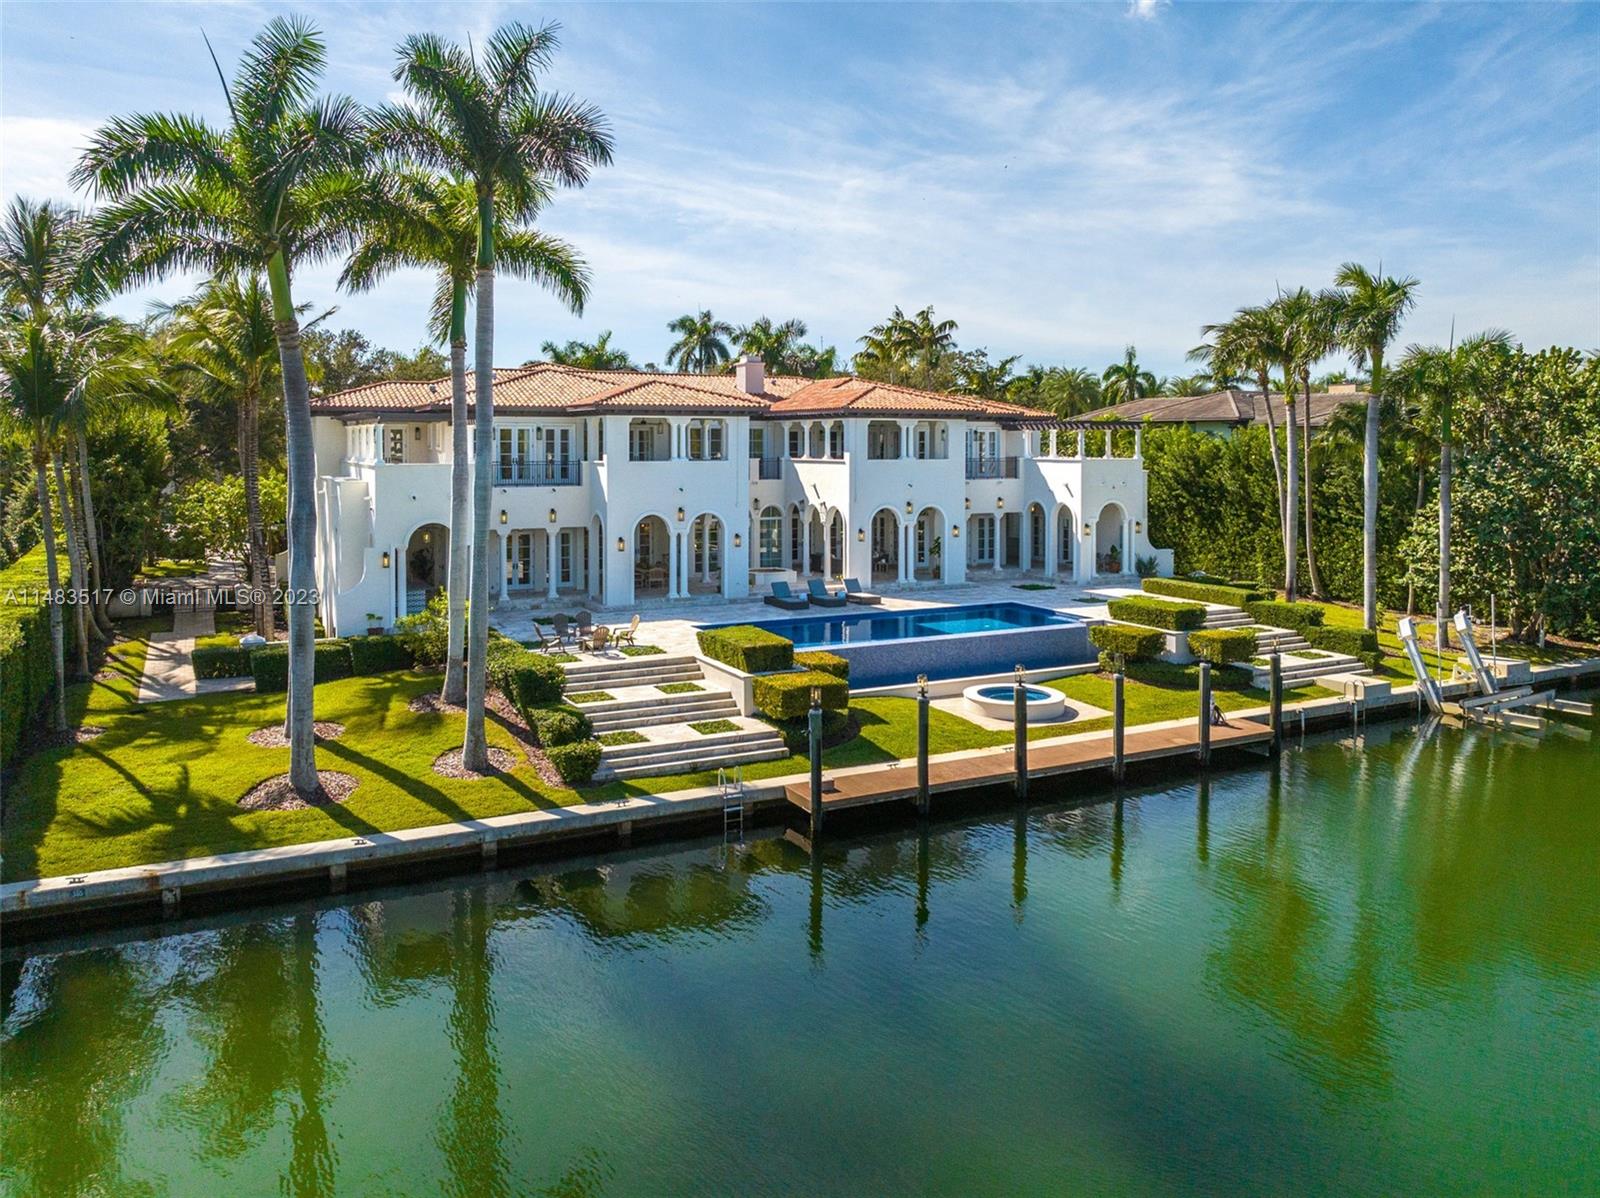 This breathtaking California Modern Spanish WATERFRONT home is in the highly desirable GATED community of GABLES ESTATES. This 10,942 Sf Home has 180 ft of water frontage &amp; a private dock with no bridges to the bay sitting on a 38,289 SF lot. This grand estate offers 8 bedrooms, 8 full baths, 3 half baths, Crestron smart house, surround sound in every room, private balconies with lush views, and various outdoor amenities, including a cabana spa, infinity pool, and more. The primary suite boasts top-of-the-line features and two walk-in closets. With 3 jr suites, 2 staff rooms, the primary suite on the second floor, elevator ready, and a guest suite on the first floor. Ideally located near the best private schools in Miami, this property is perfect for any family to call home.